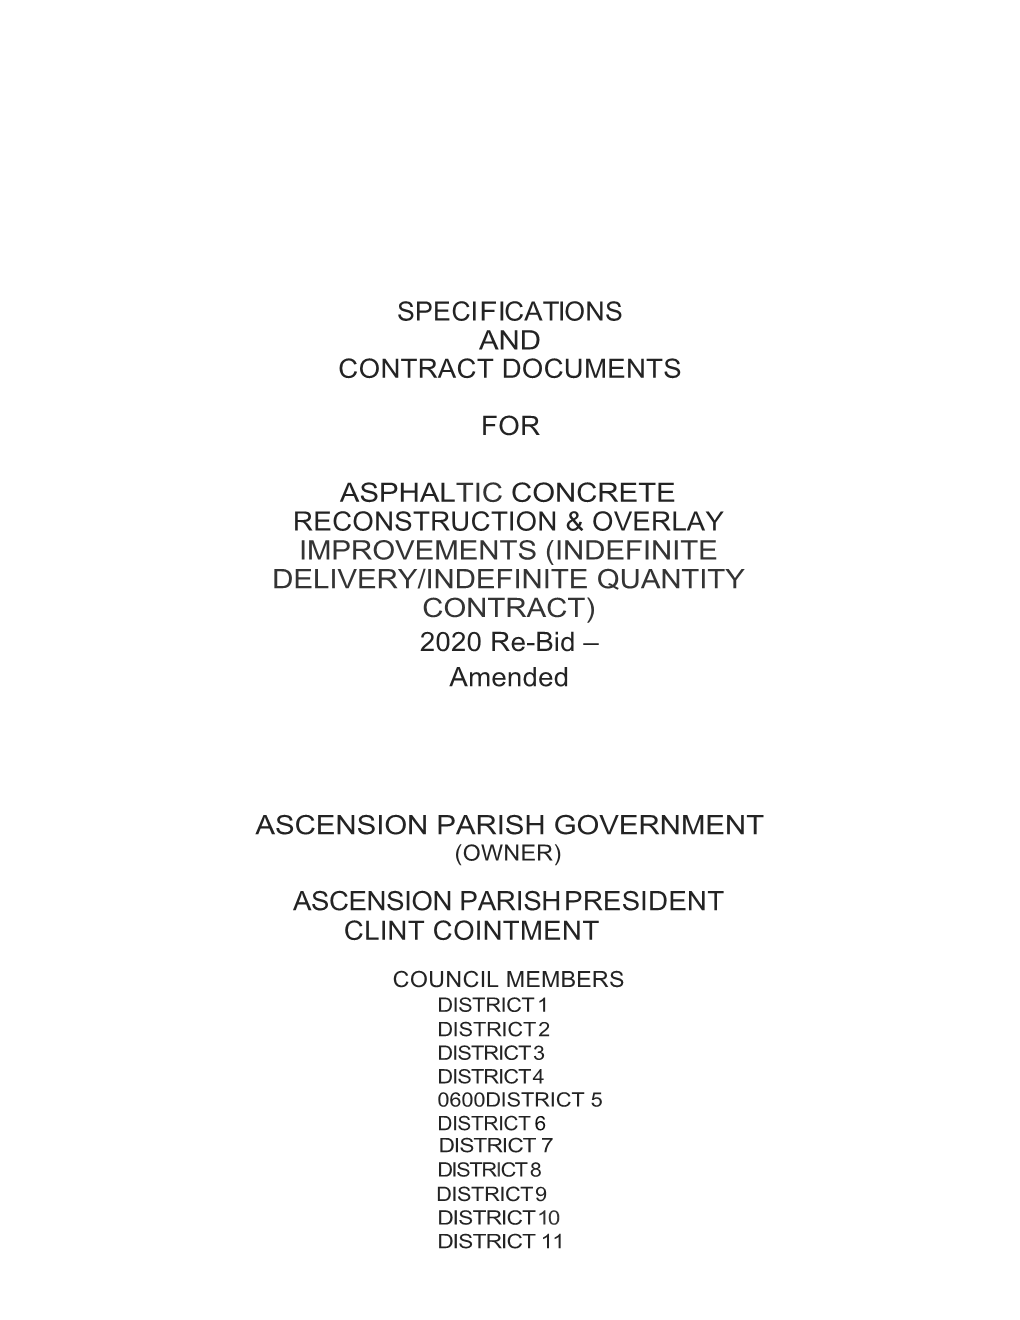 Specifications and Contract Documents for Asphaltic